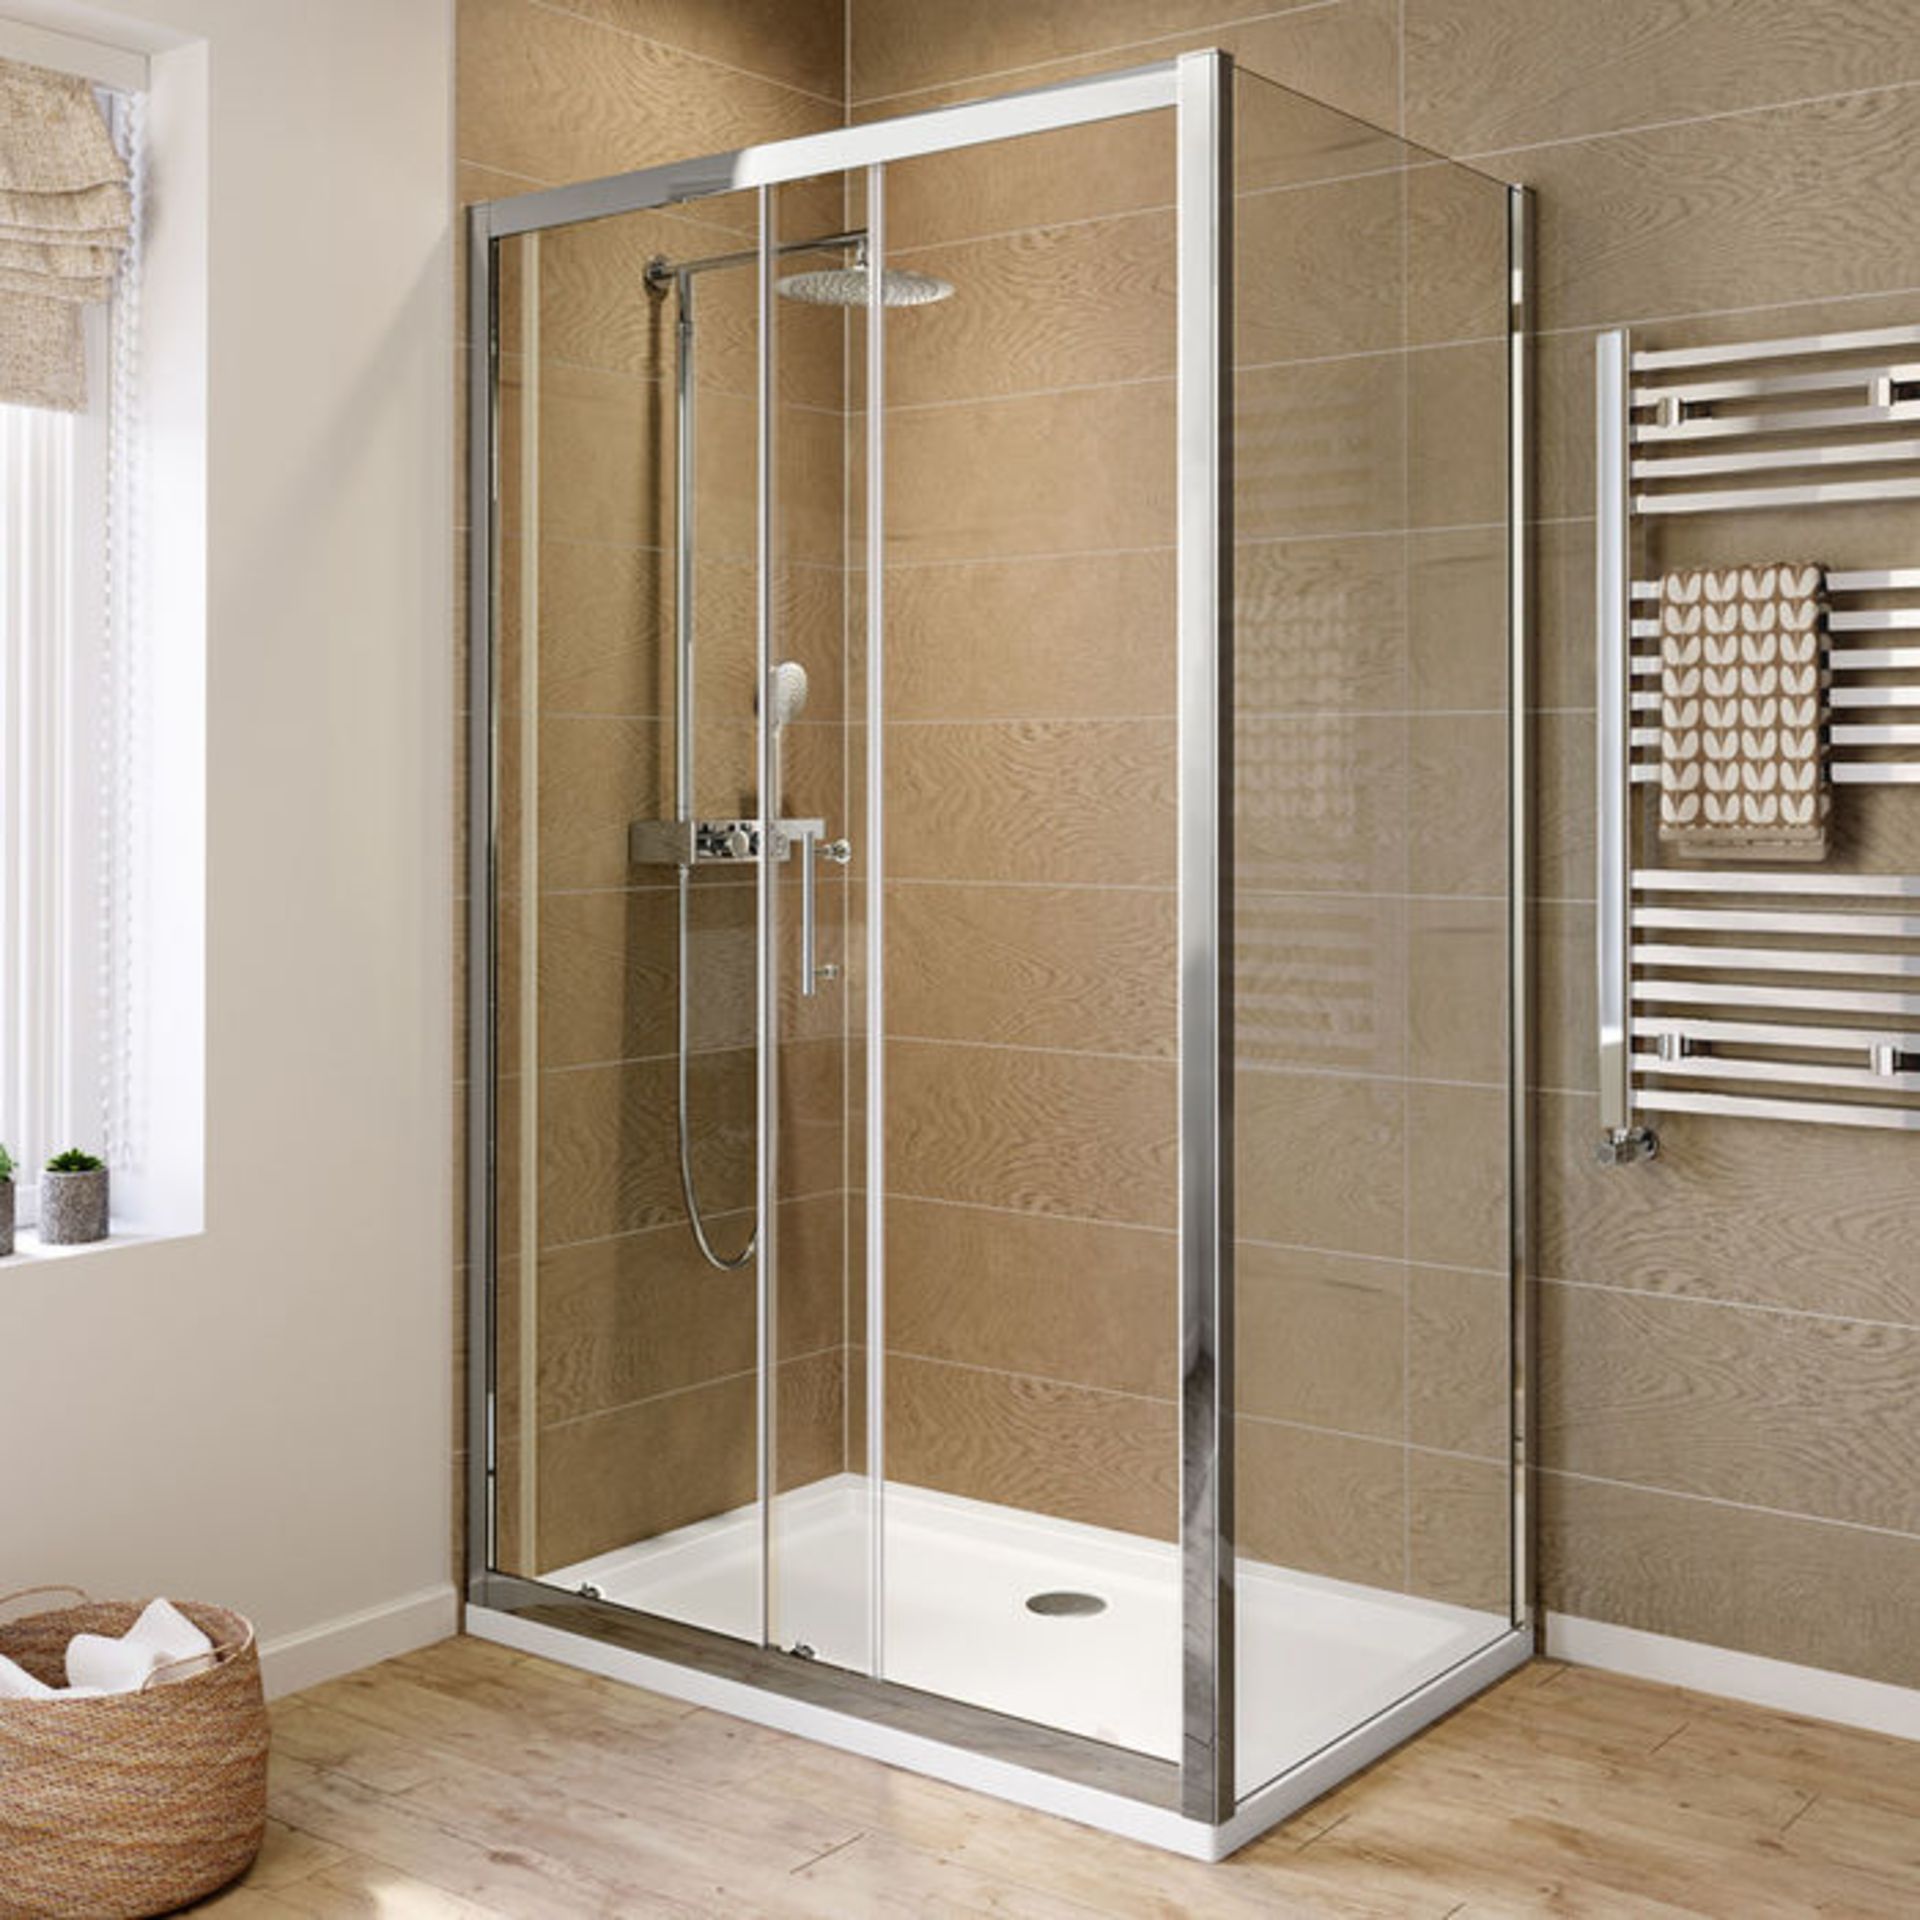 (HP100) 1000x760mm - 6mm - Elements Sliding Door Shower Enclosure. RRP £449.99. 6mm Safety Glass - Image 2 of 4